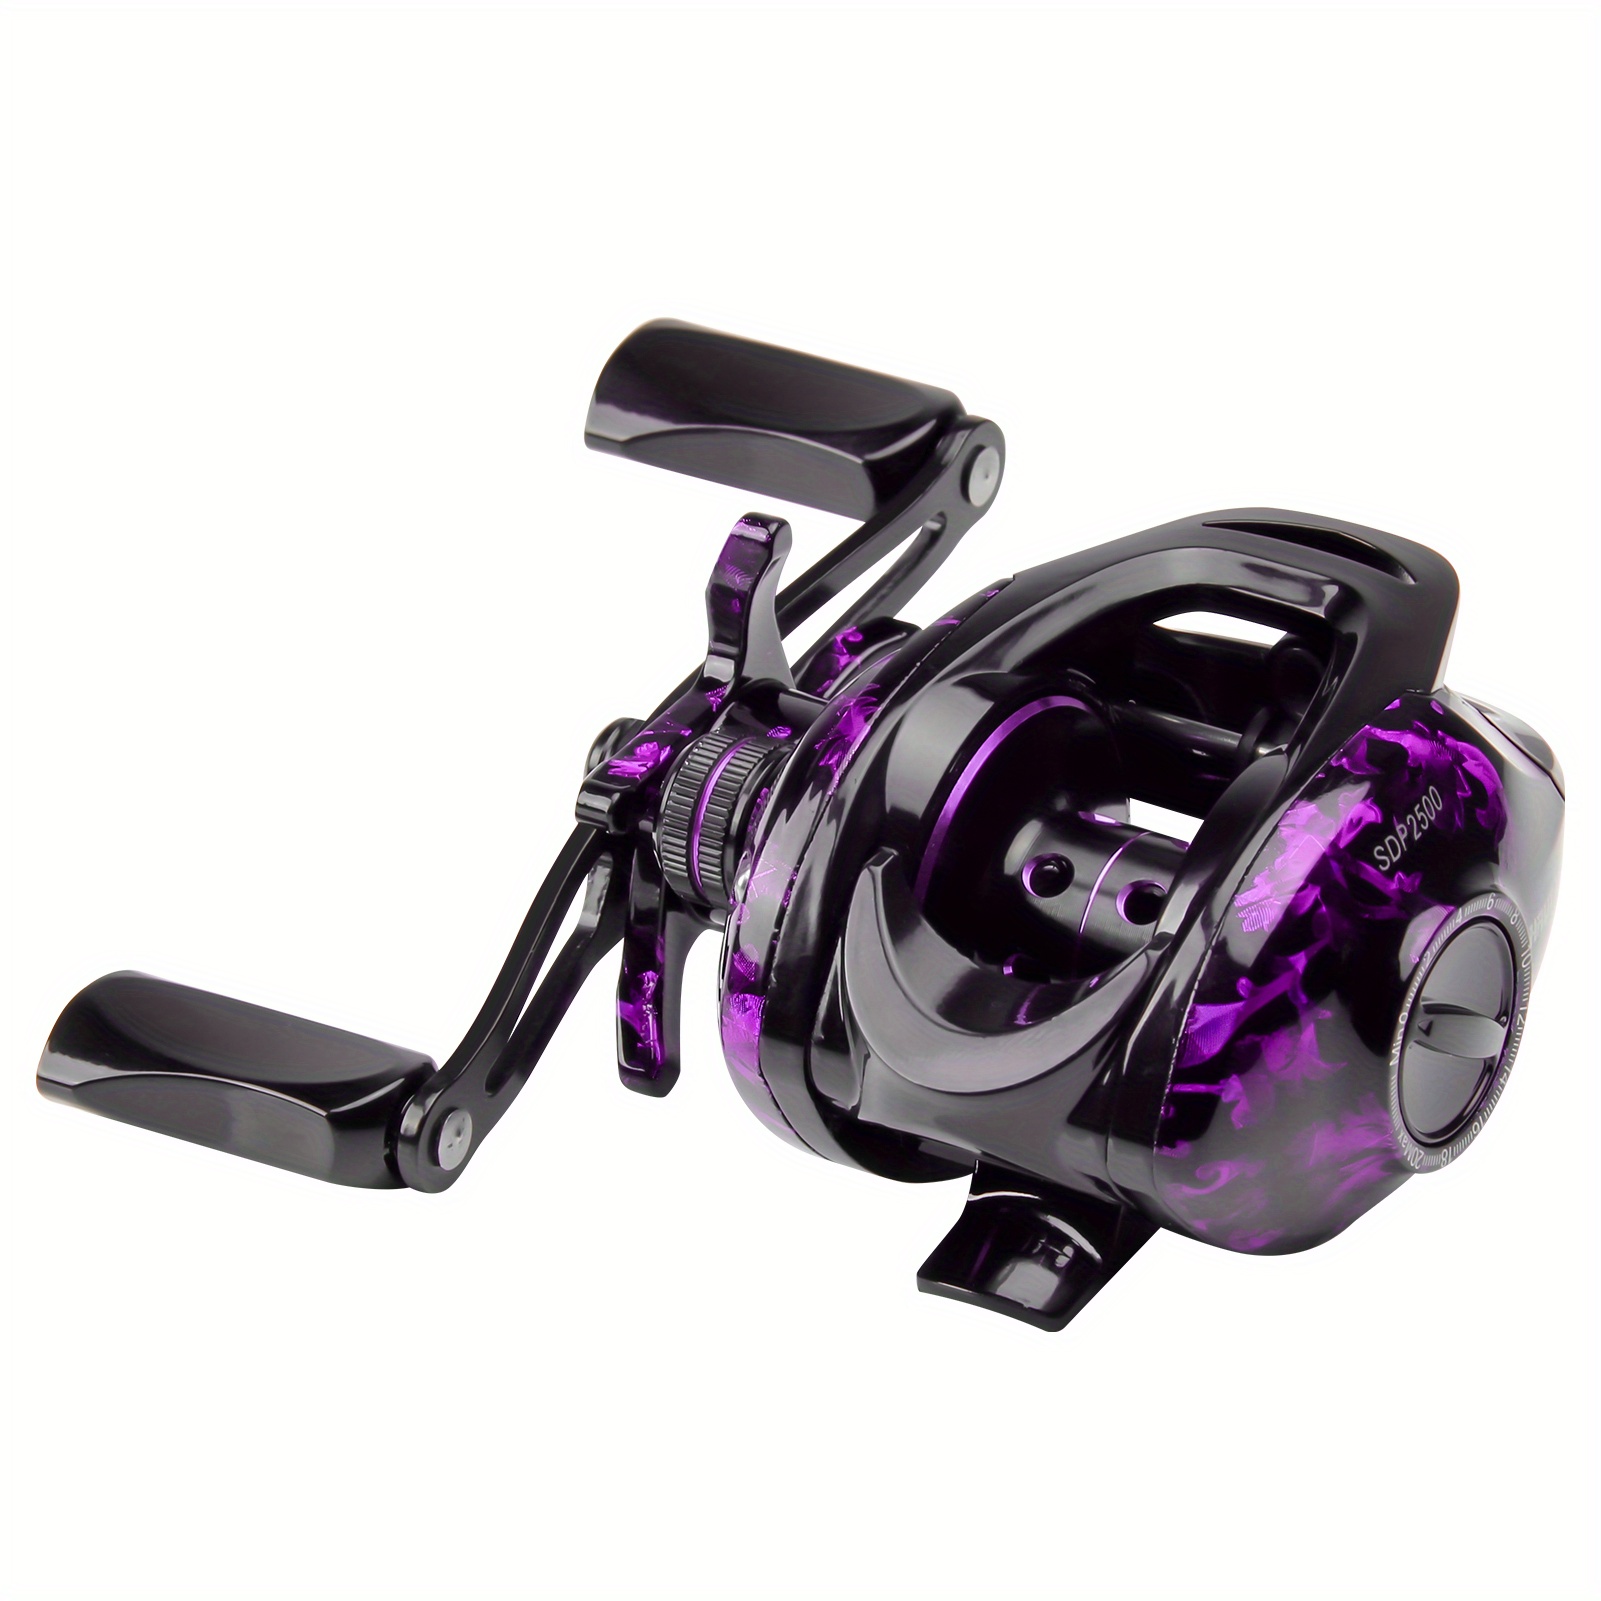 Black Cyclone Baitcasting Fishing Reel with 6.3:1 Gear Ratio, 18LB Max  Drag, 7oz Weight, Nylon Frame and Magnetic Braking System - Ideal for  Beginner